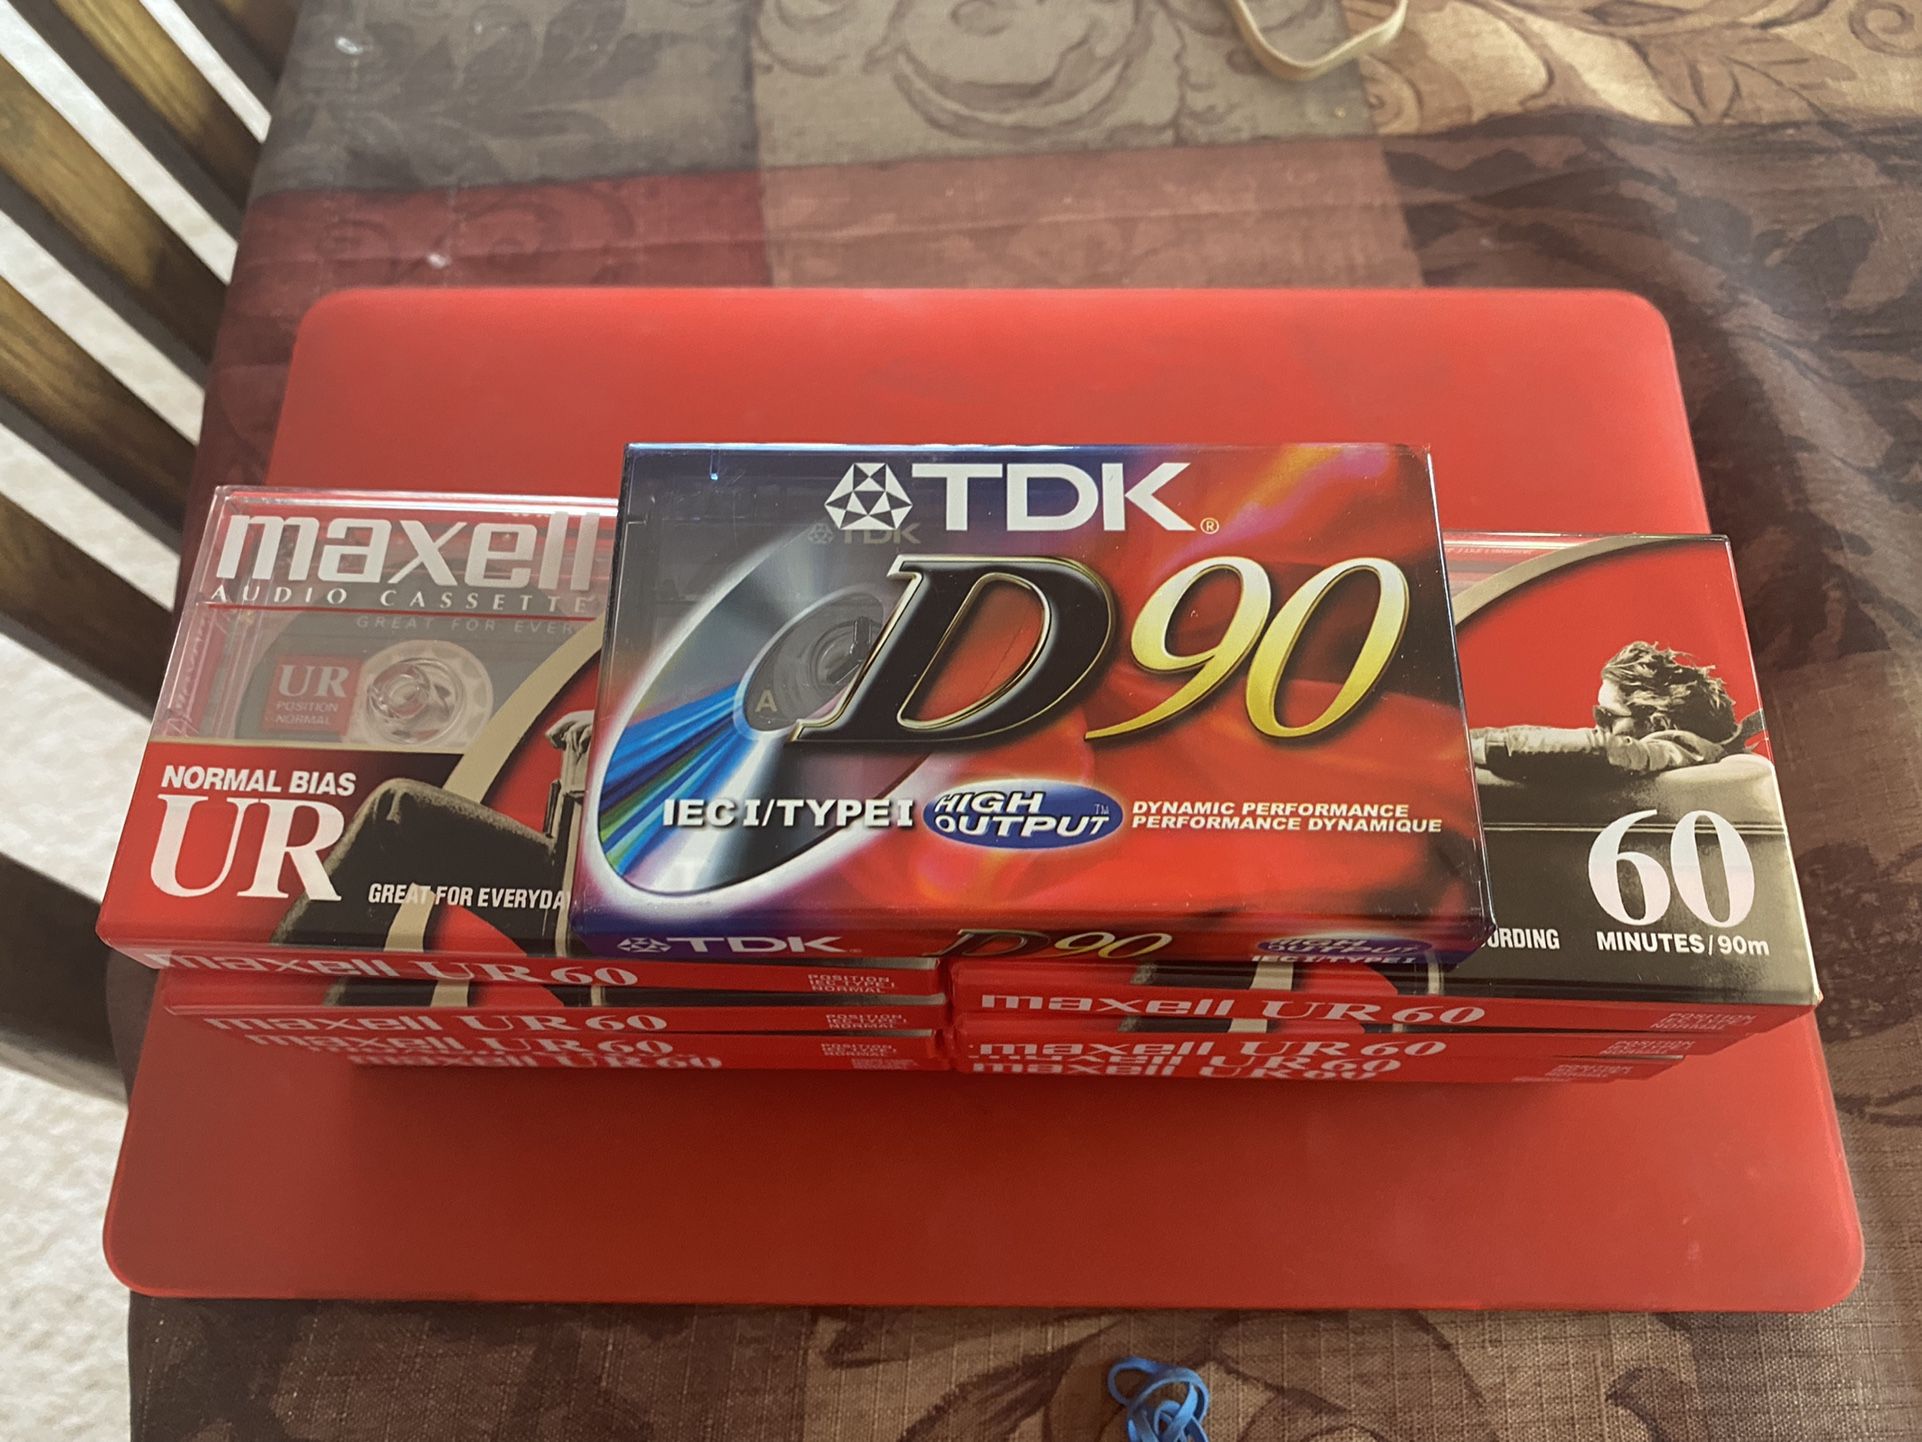 10 Maxell 60 cassette tapes and 1 TDK 90 cassette.   Originally sealed. $4 each or $28 for lot.  Message me how many you would like  